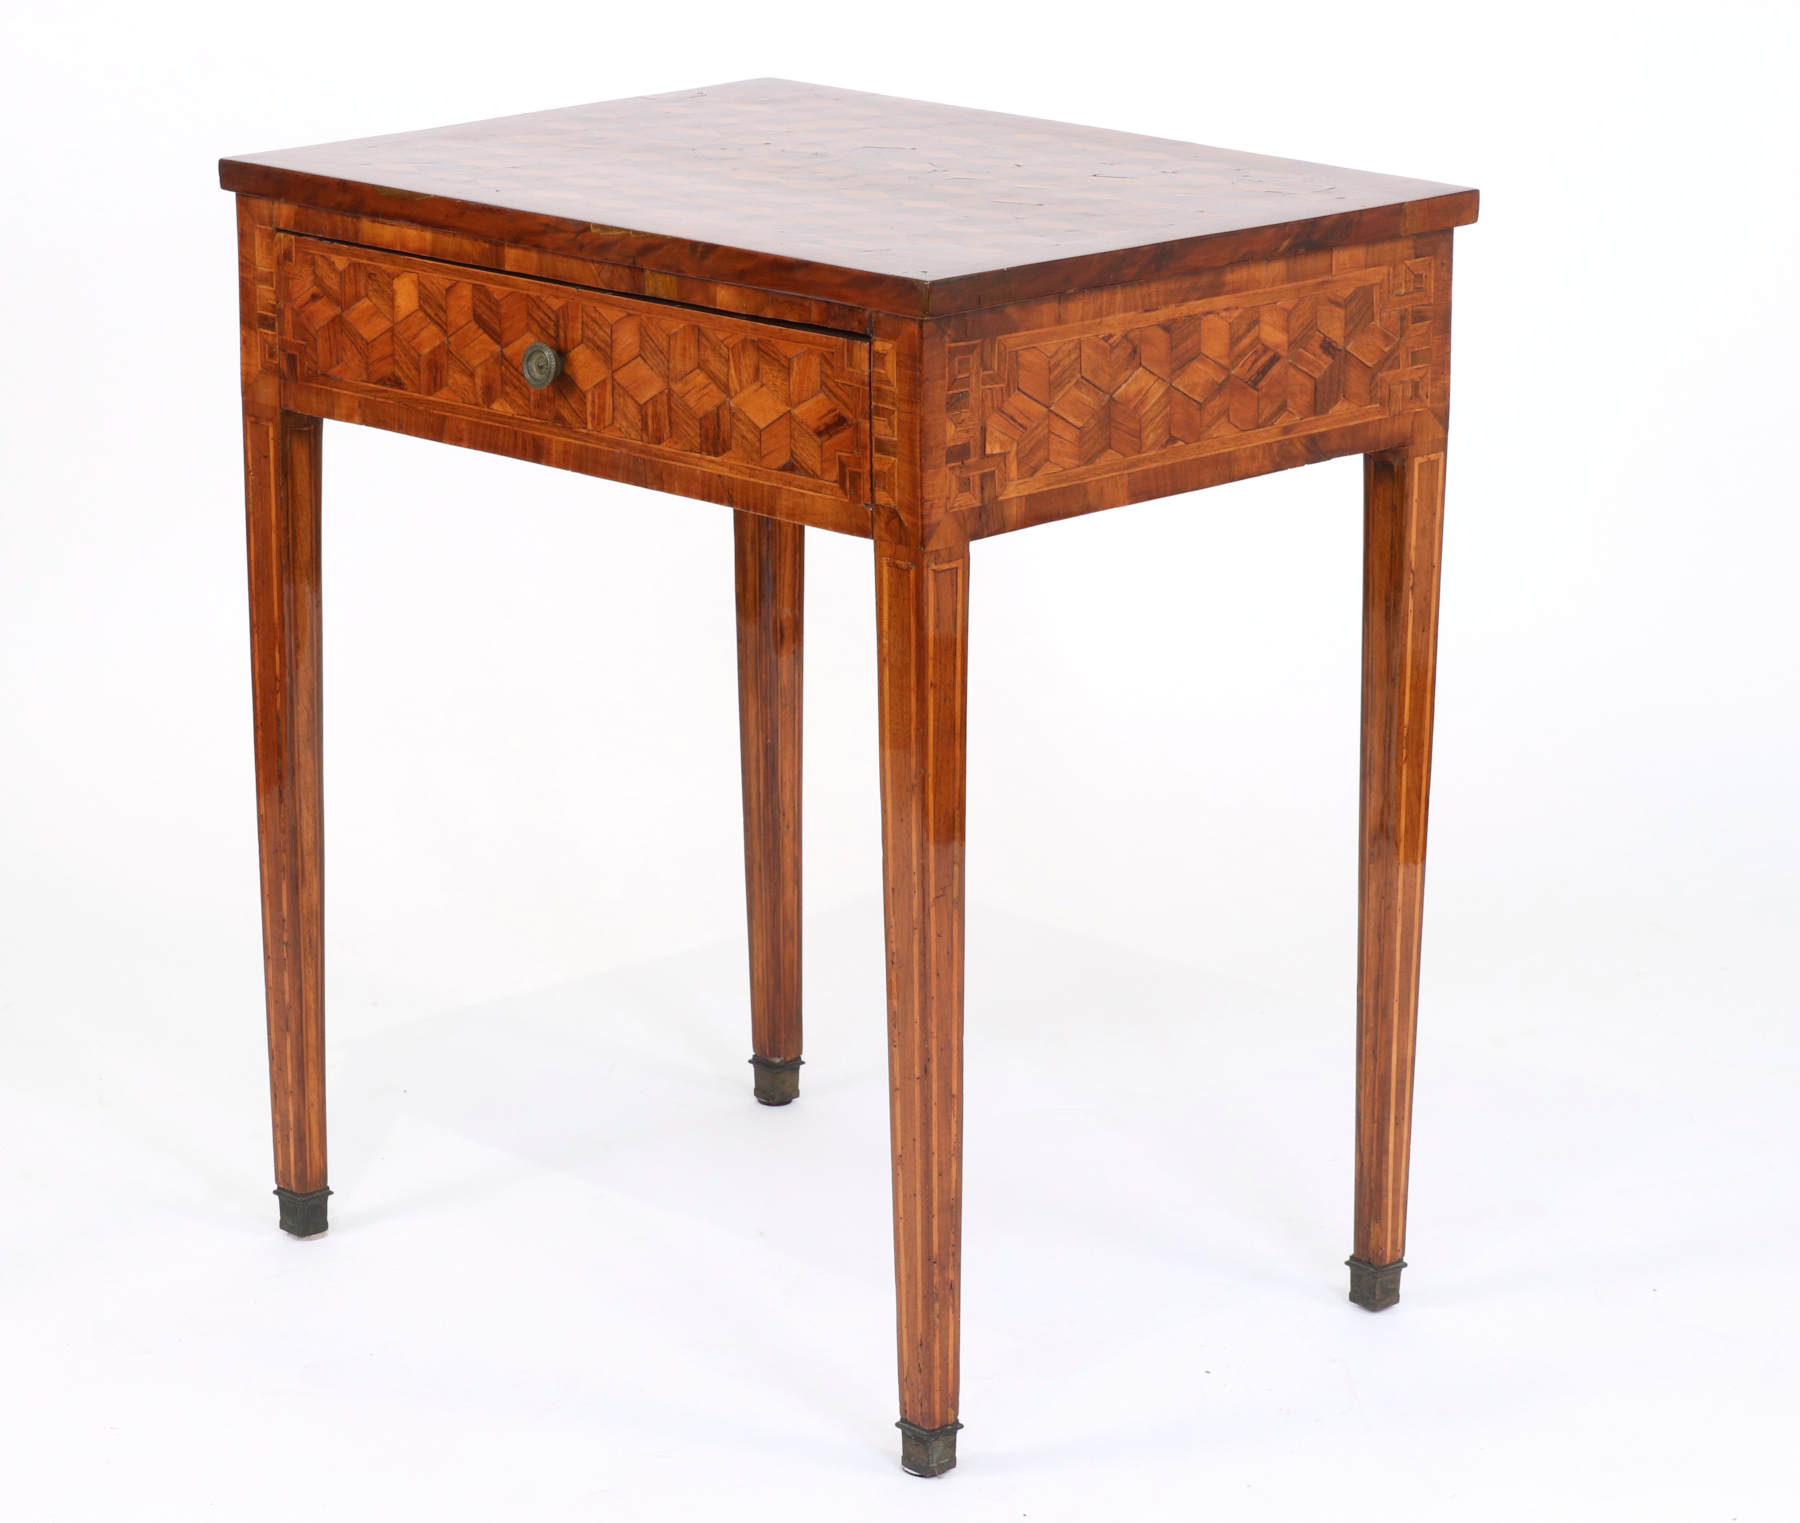 Italian Parquetry Side Table, c. 1790